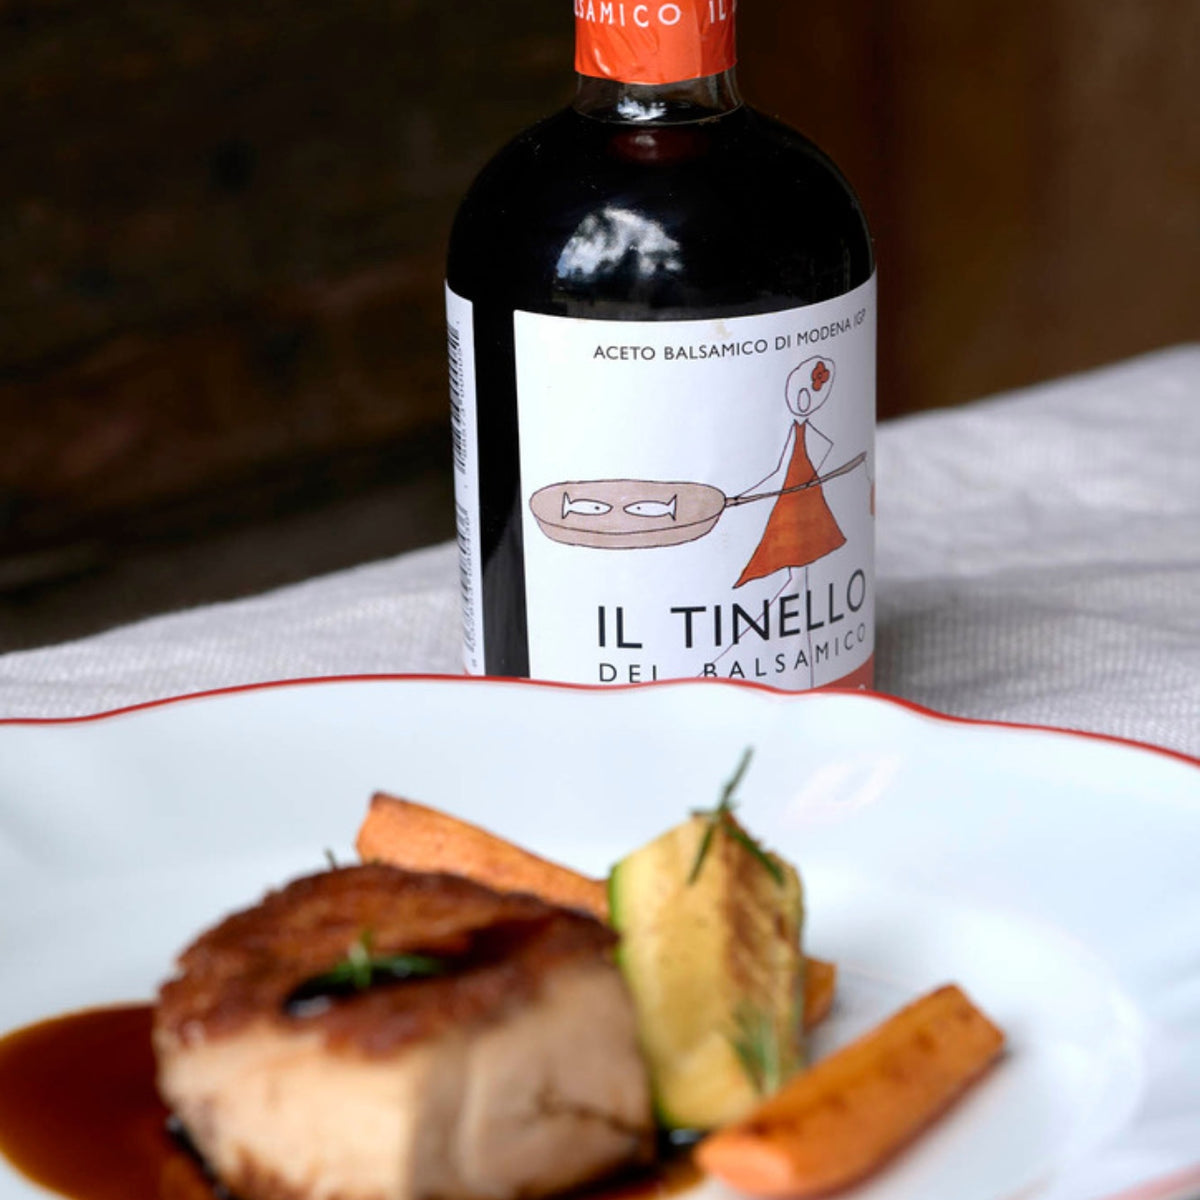 l Borgo del Balsamico Il Tinello Balsamic Vinegar of Modena IGP Orange Label Medium Acidity (without box) 250ml | Imported and distributed in the UK by Just Gourmet Foods